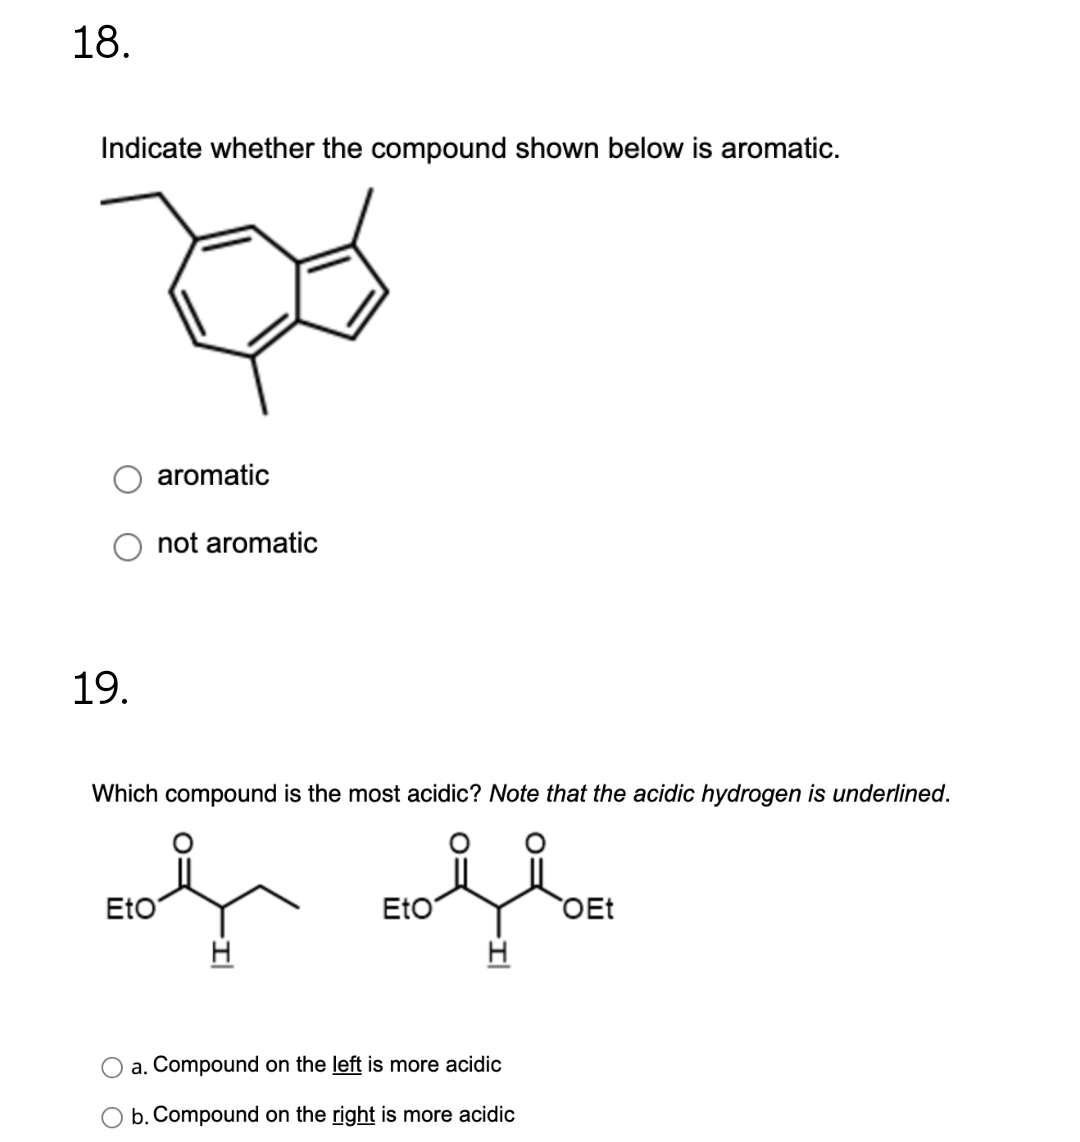 18.
Indicate whether the compound shown below is aromatic.
19.
aromatic
not aromatic
Which compound is the most acidic? Note that the acidic hydrogen is underlined.
of ofte
Eto
OEt
a. Compound on the left is more acidic
b. Compound on the right is more acidic